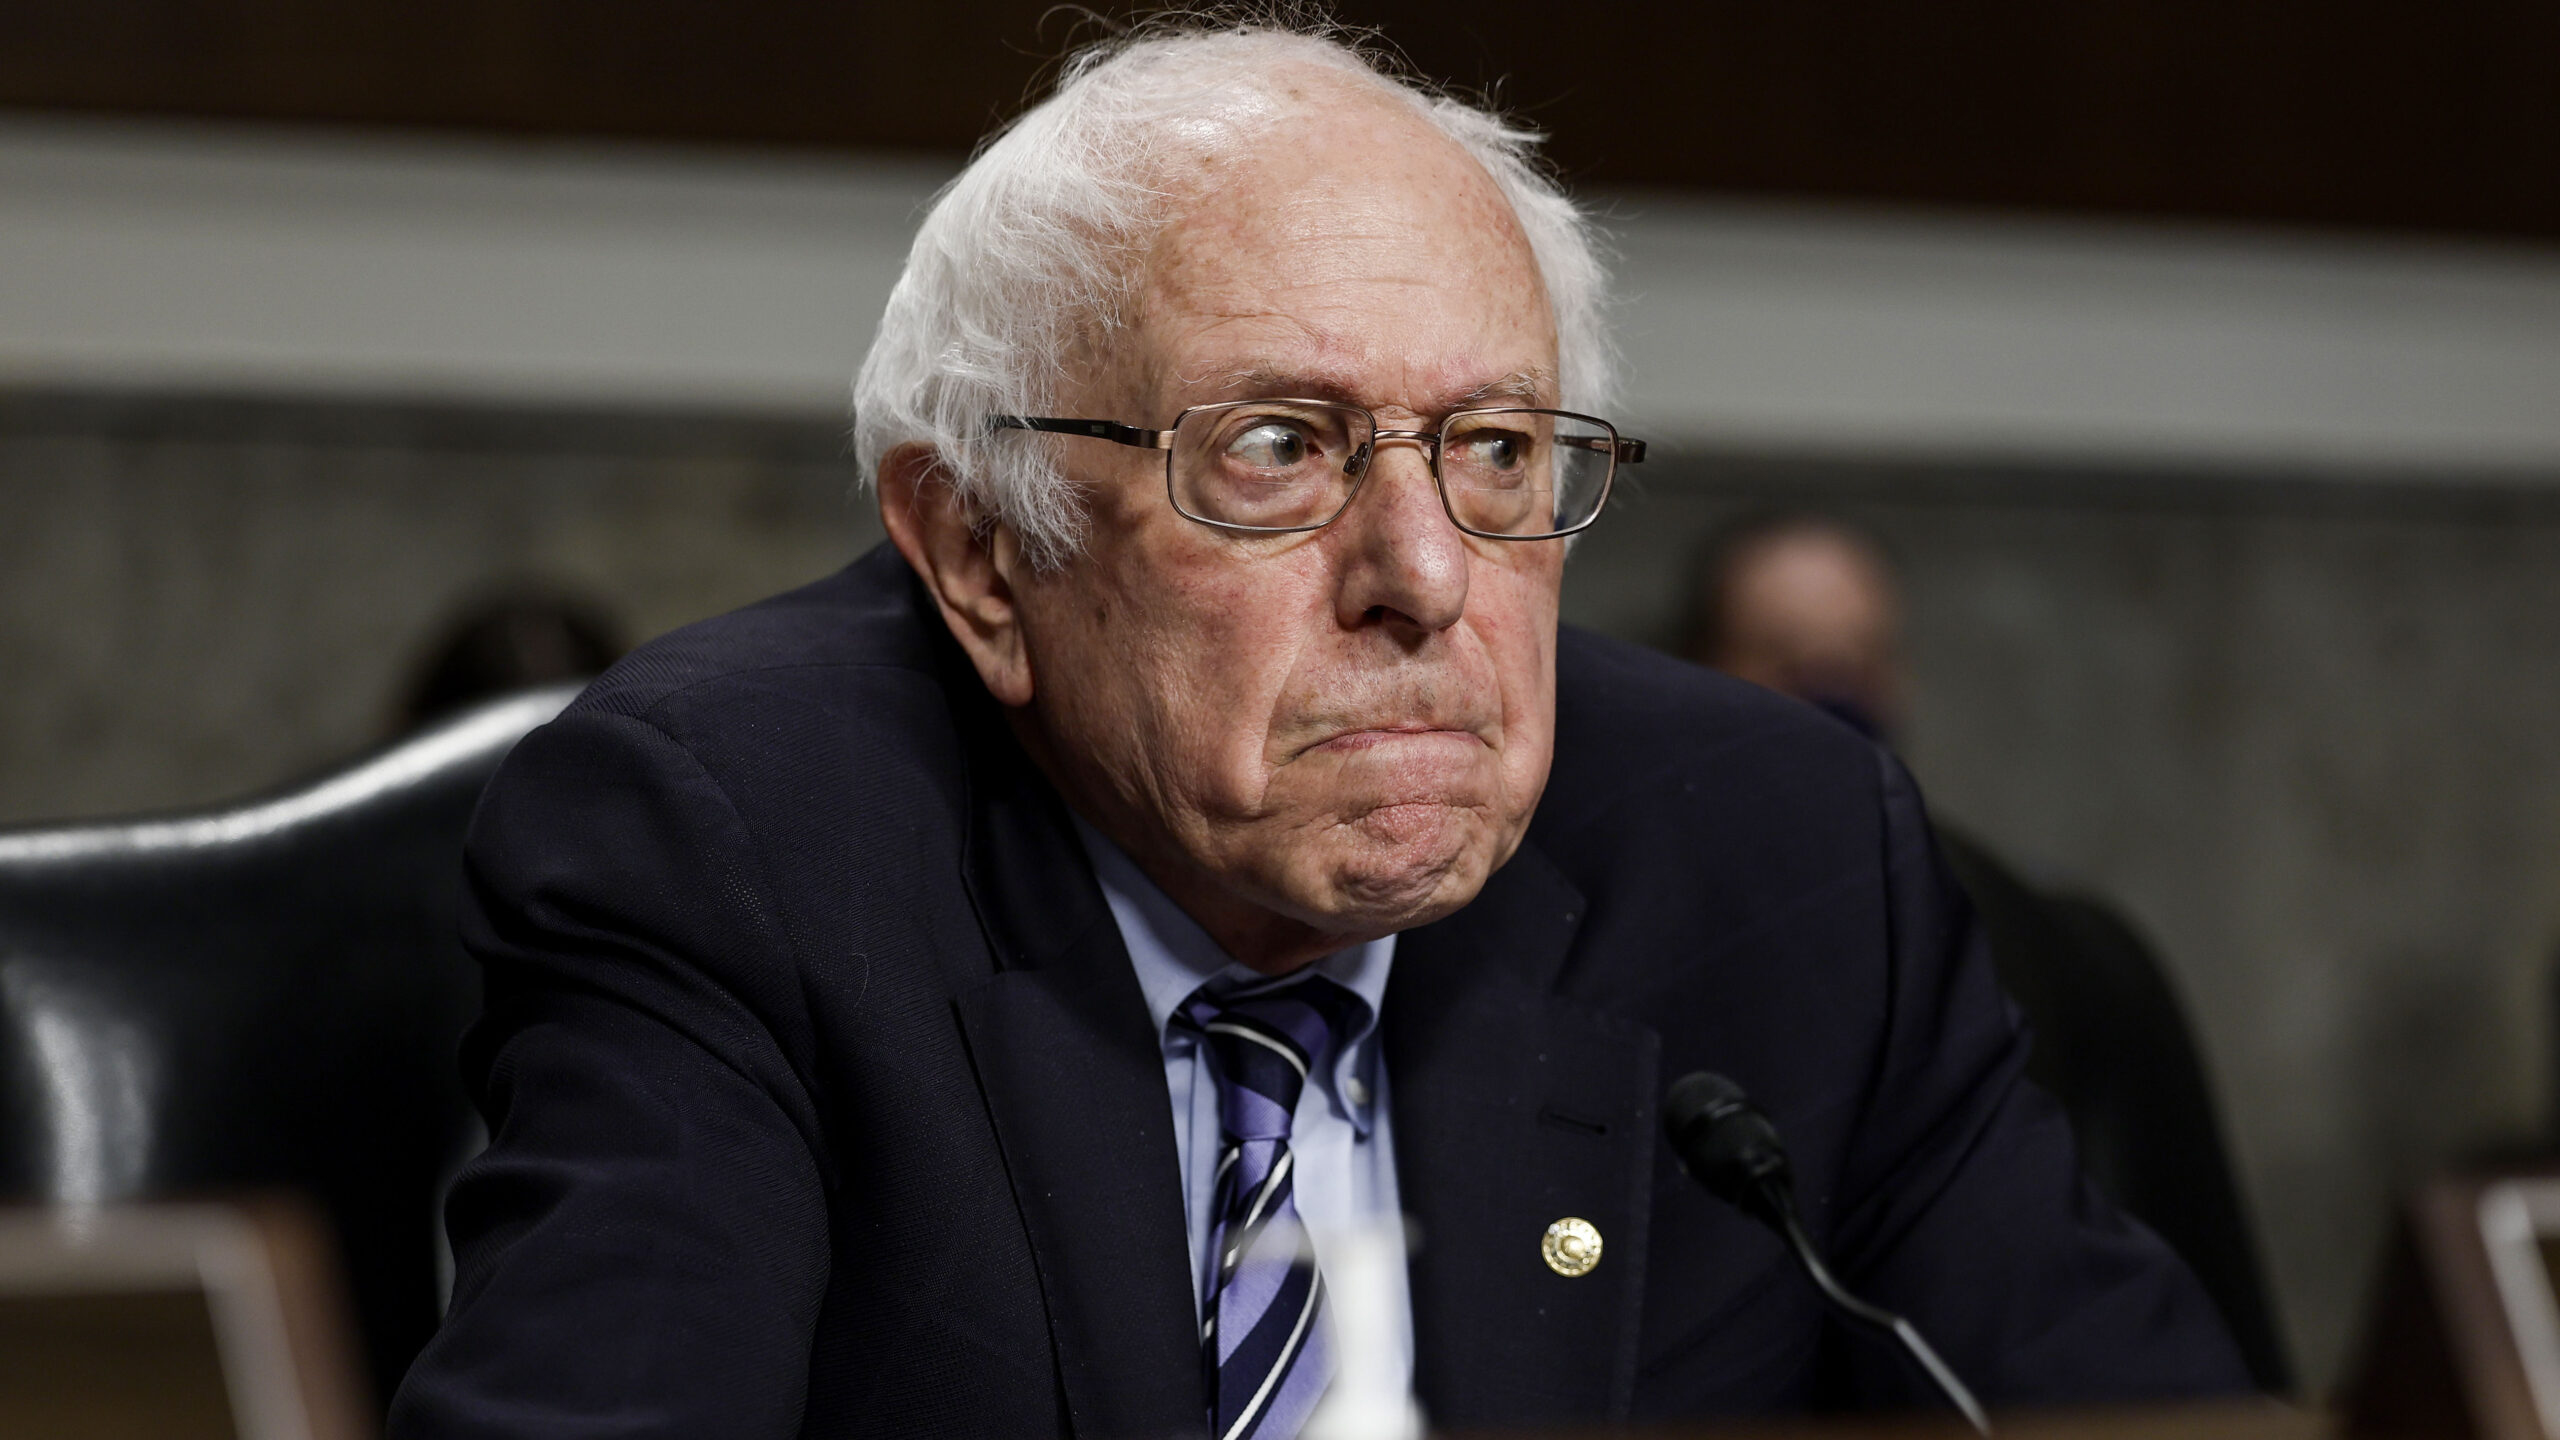 Sanders On Why Democrats Won’t Primary Biden: ‘Has To Do With A Fear Of Growth Of Right-Wing Extremism’